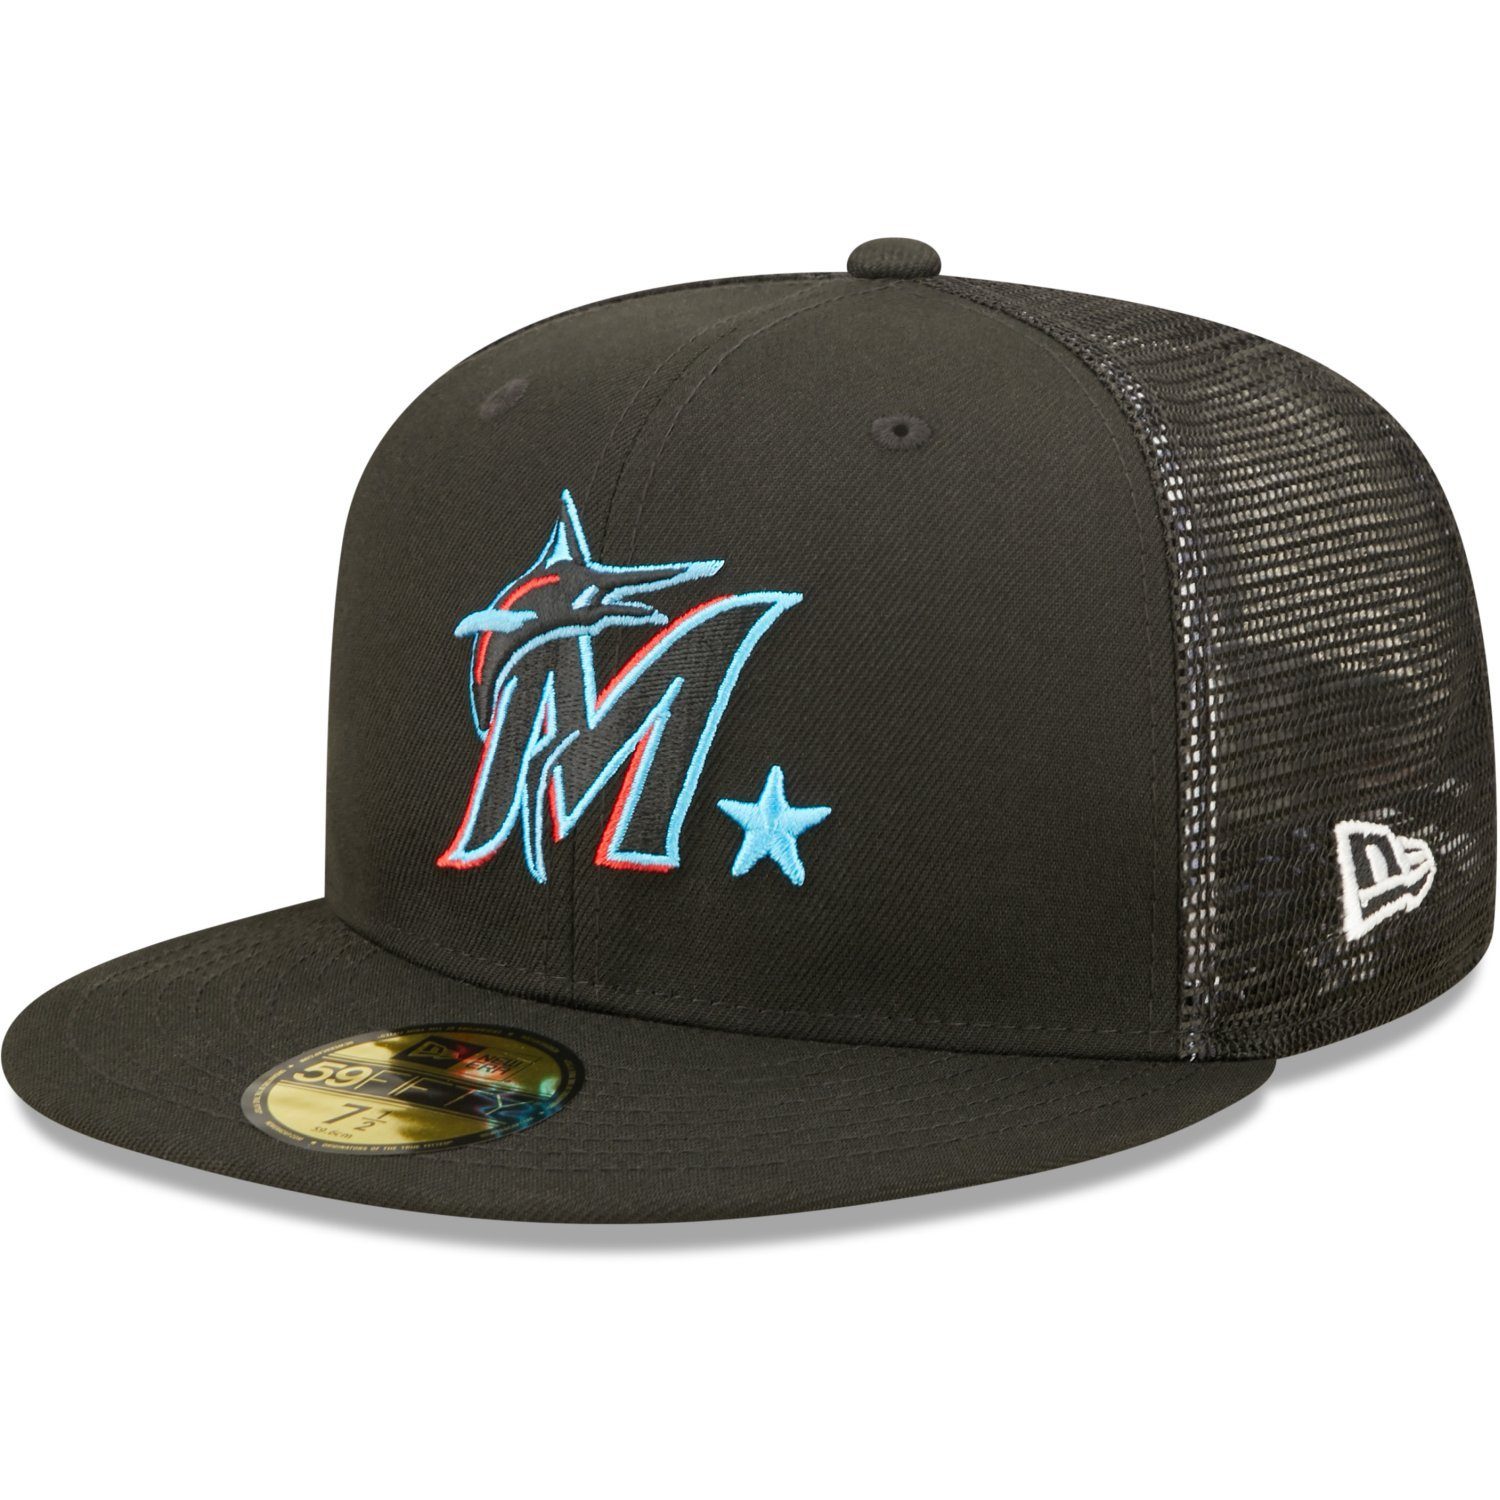 New Era Marlins ALLSTAR Fitted 59Fifty GAME Cap Miami